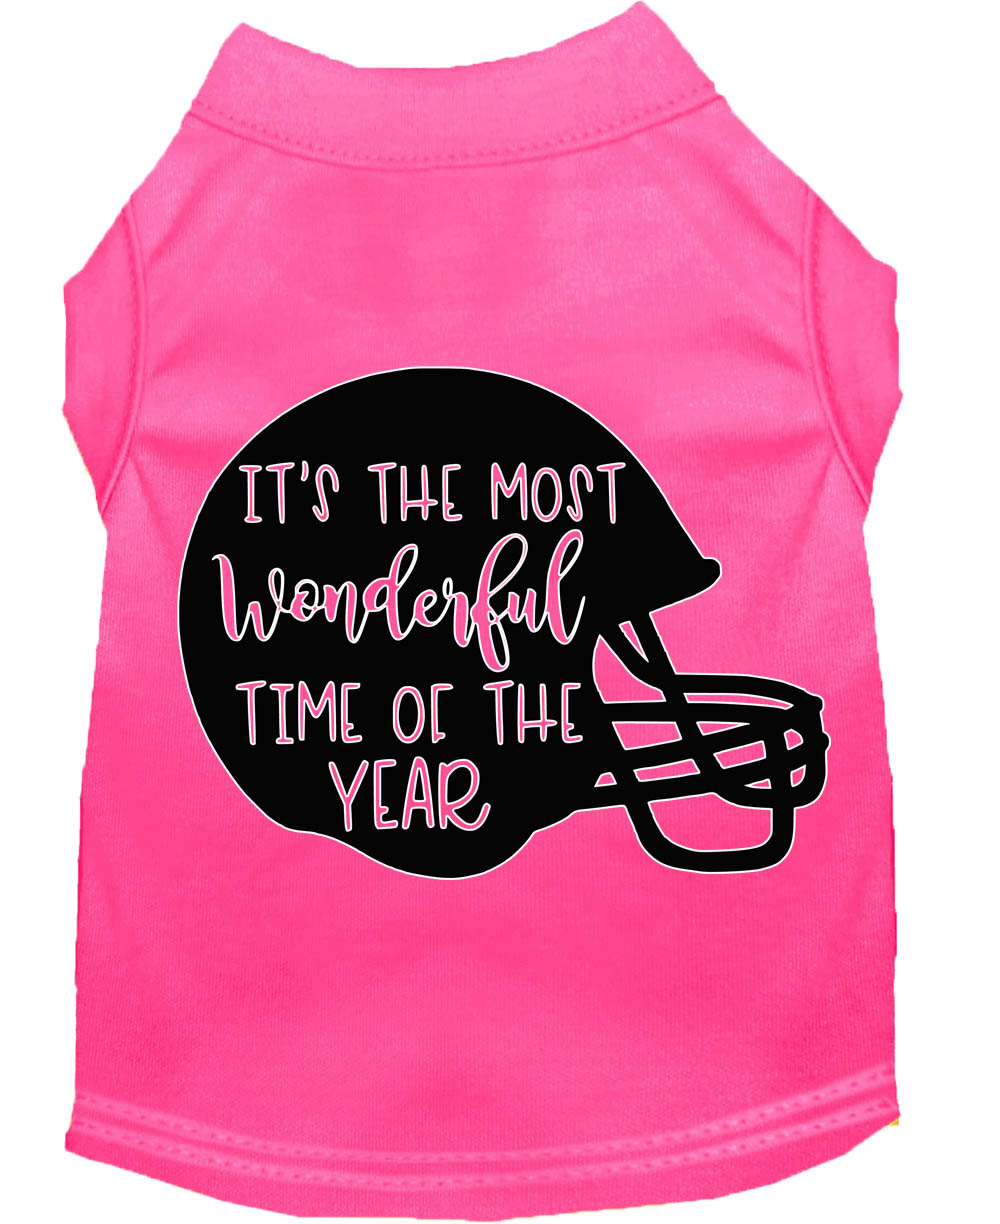 Most Wonderful Time of the Year (Football) Screen Print Dog Shirt Bright Pink XL